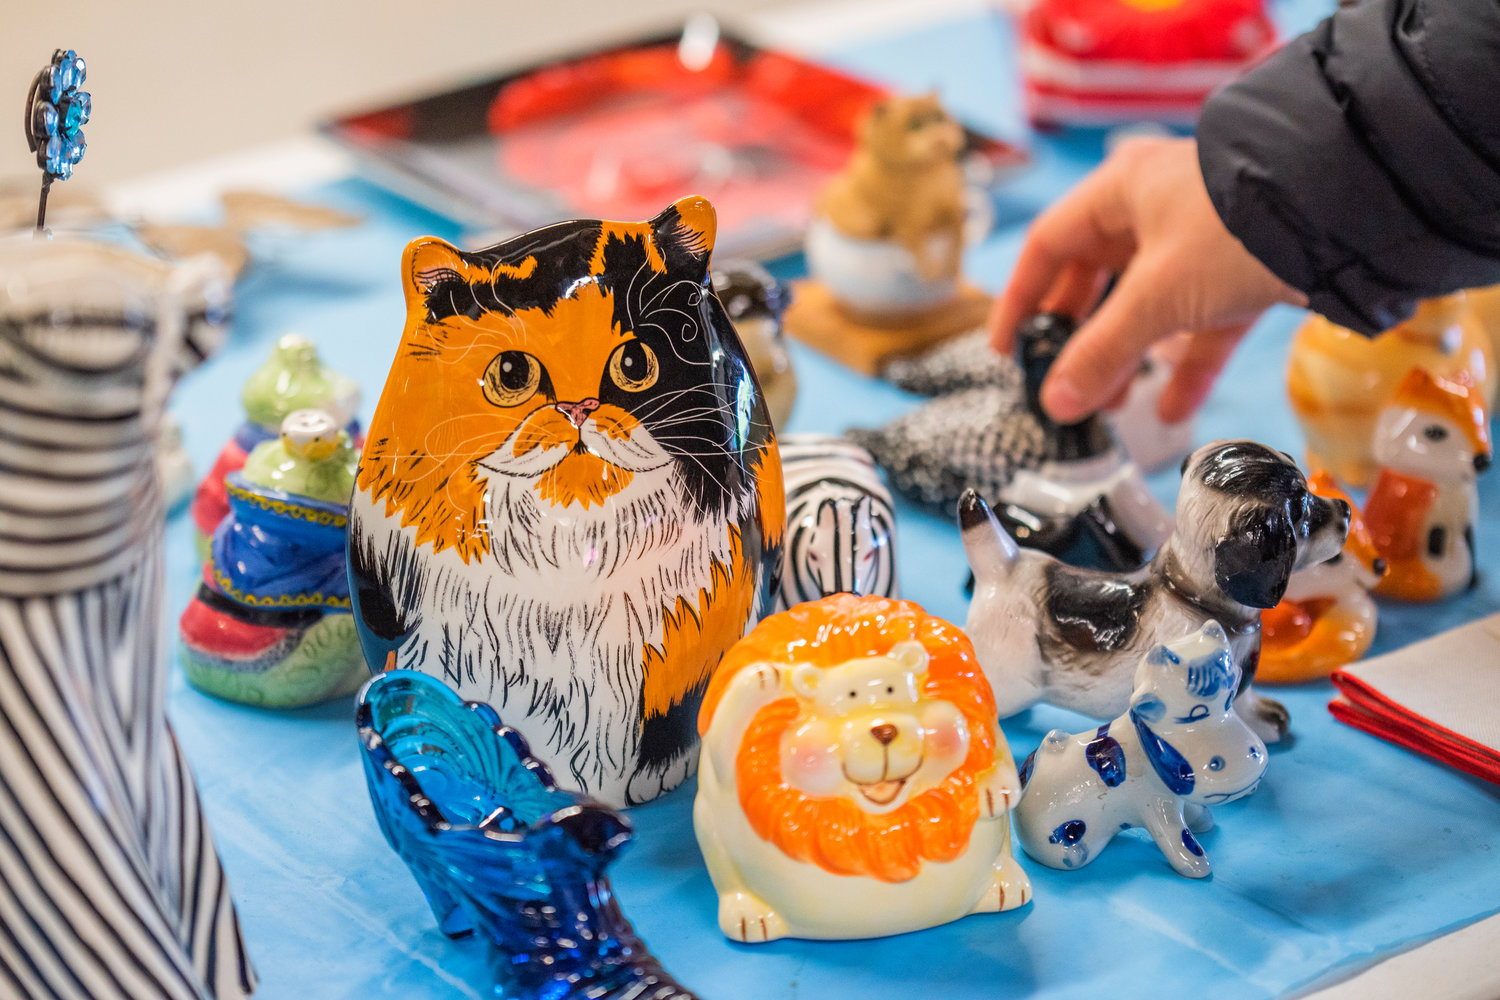 Animal-shaped decor is displayed on a table at the Southwest Washington Fairgrounds in Centralia on Saturday during the Spring Community Garage Sale.